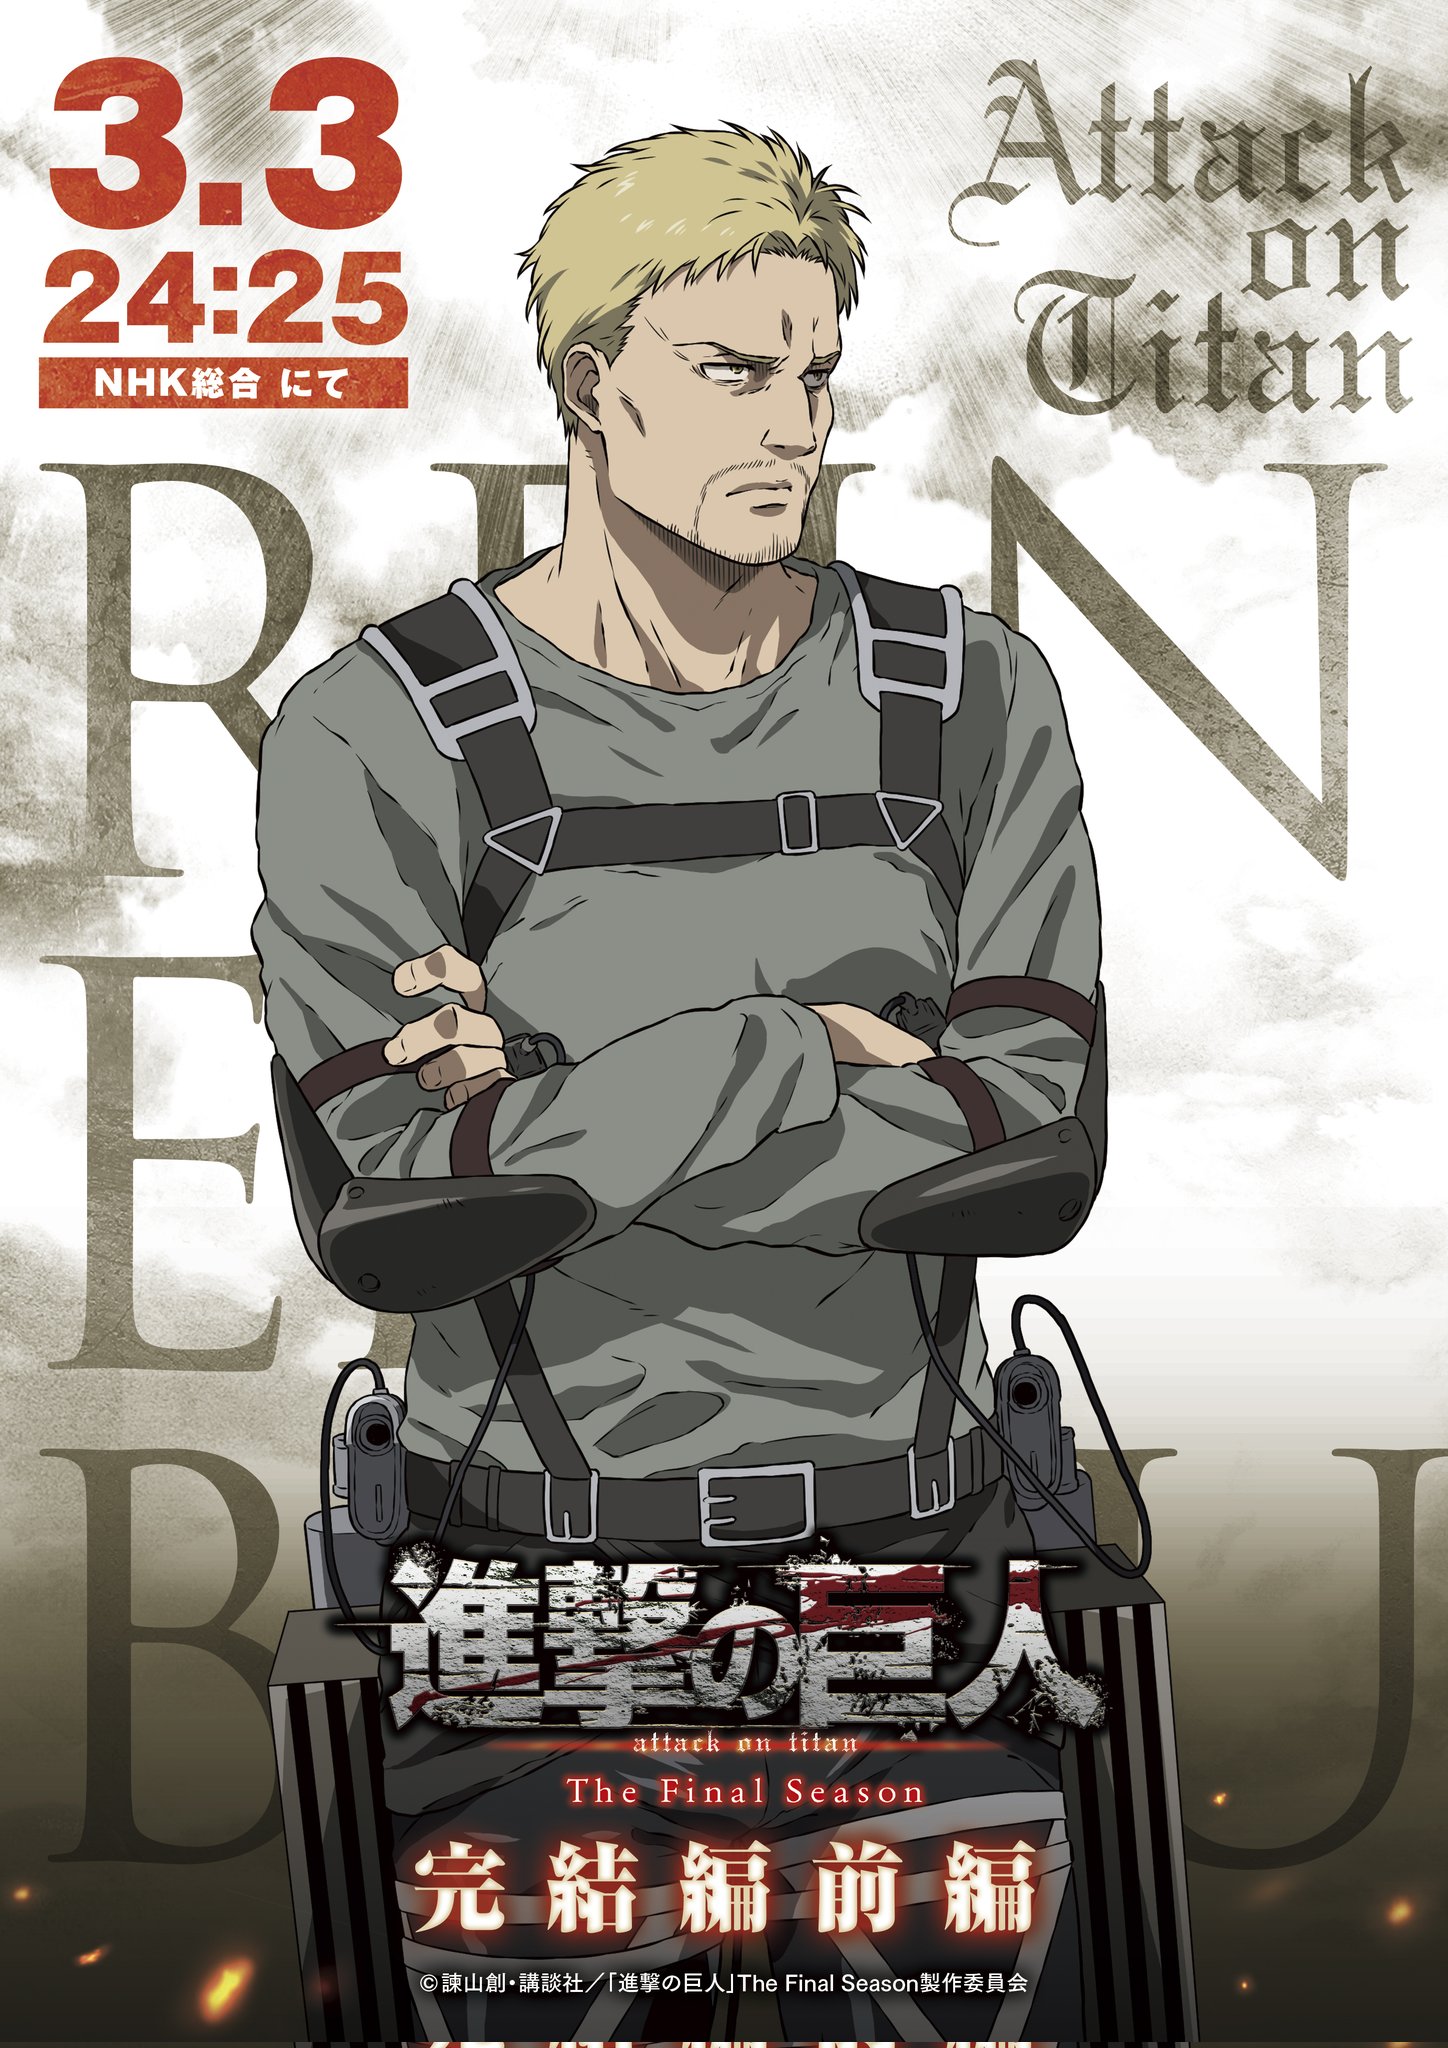 Why Reiner Braun Becomes the Protagonist in the Final Season of